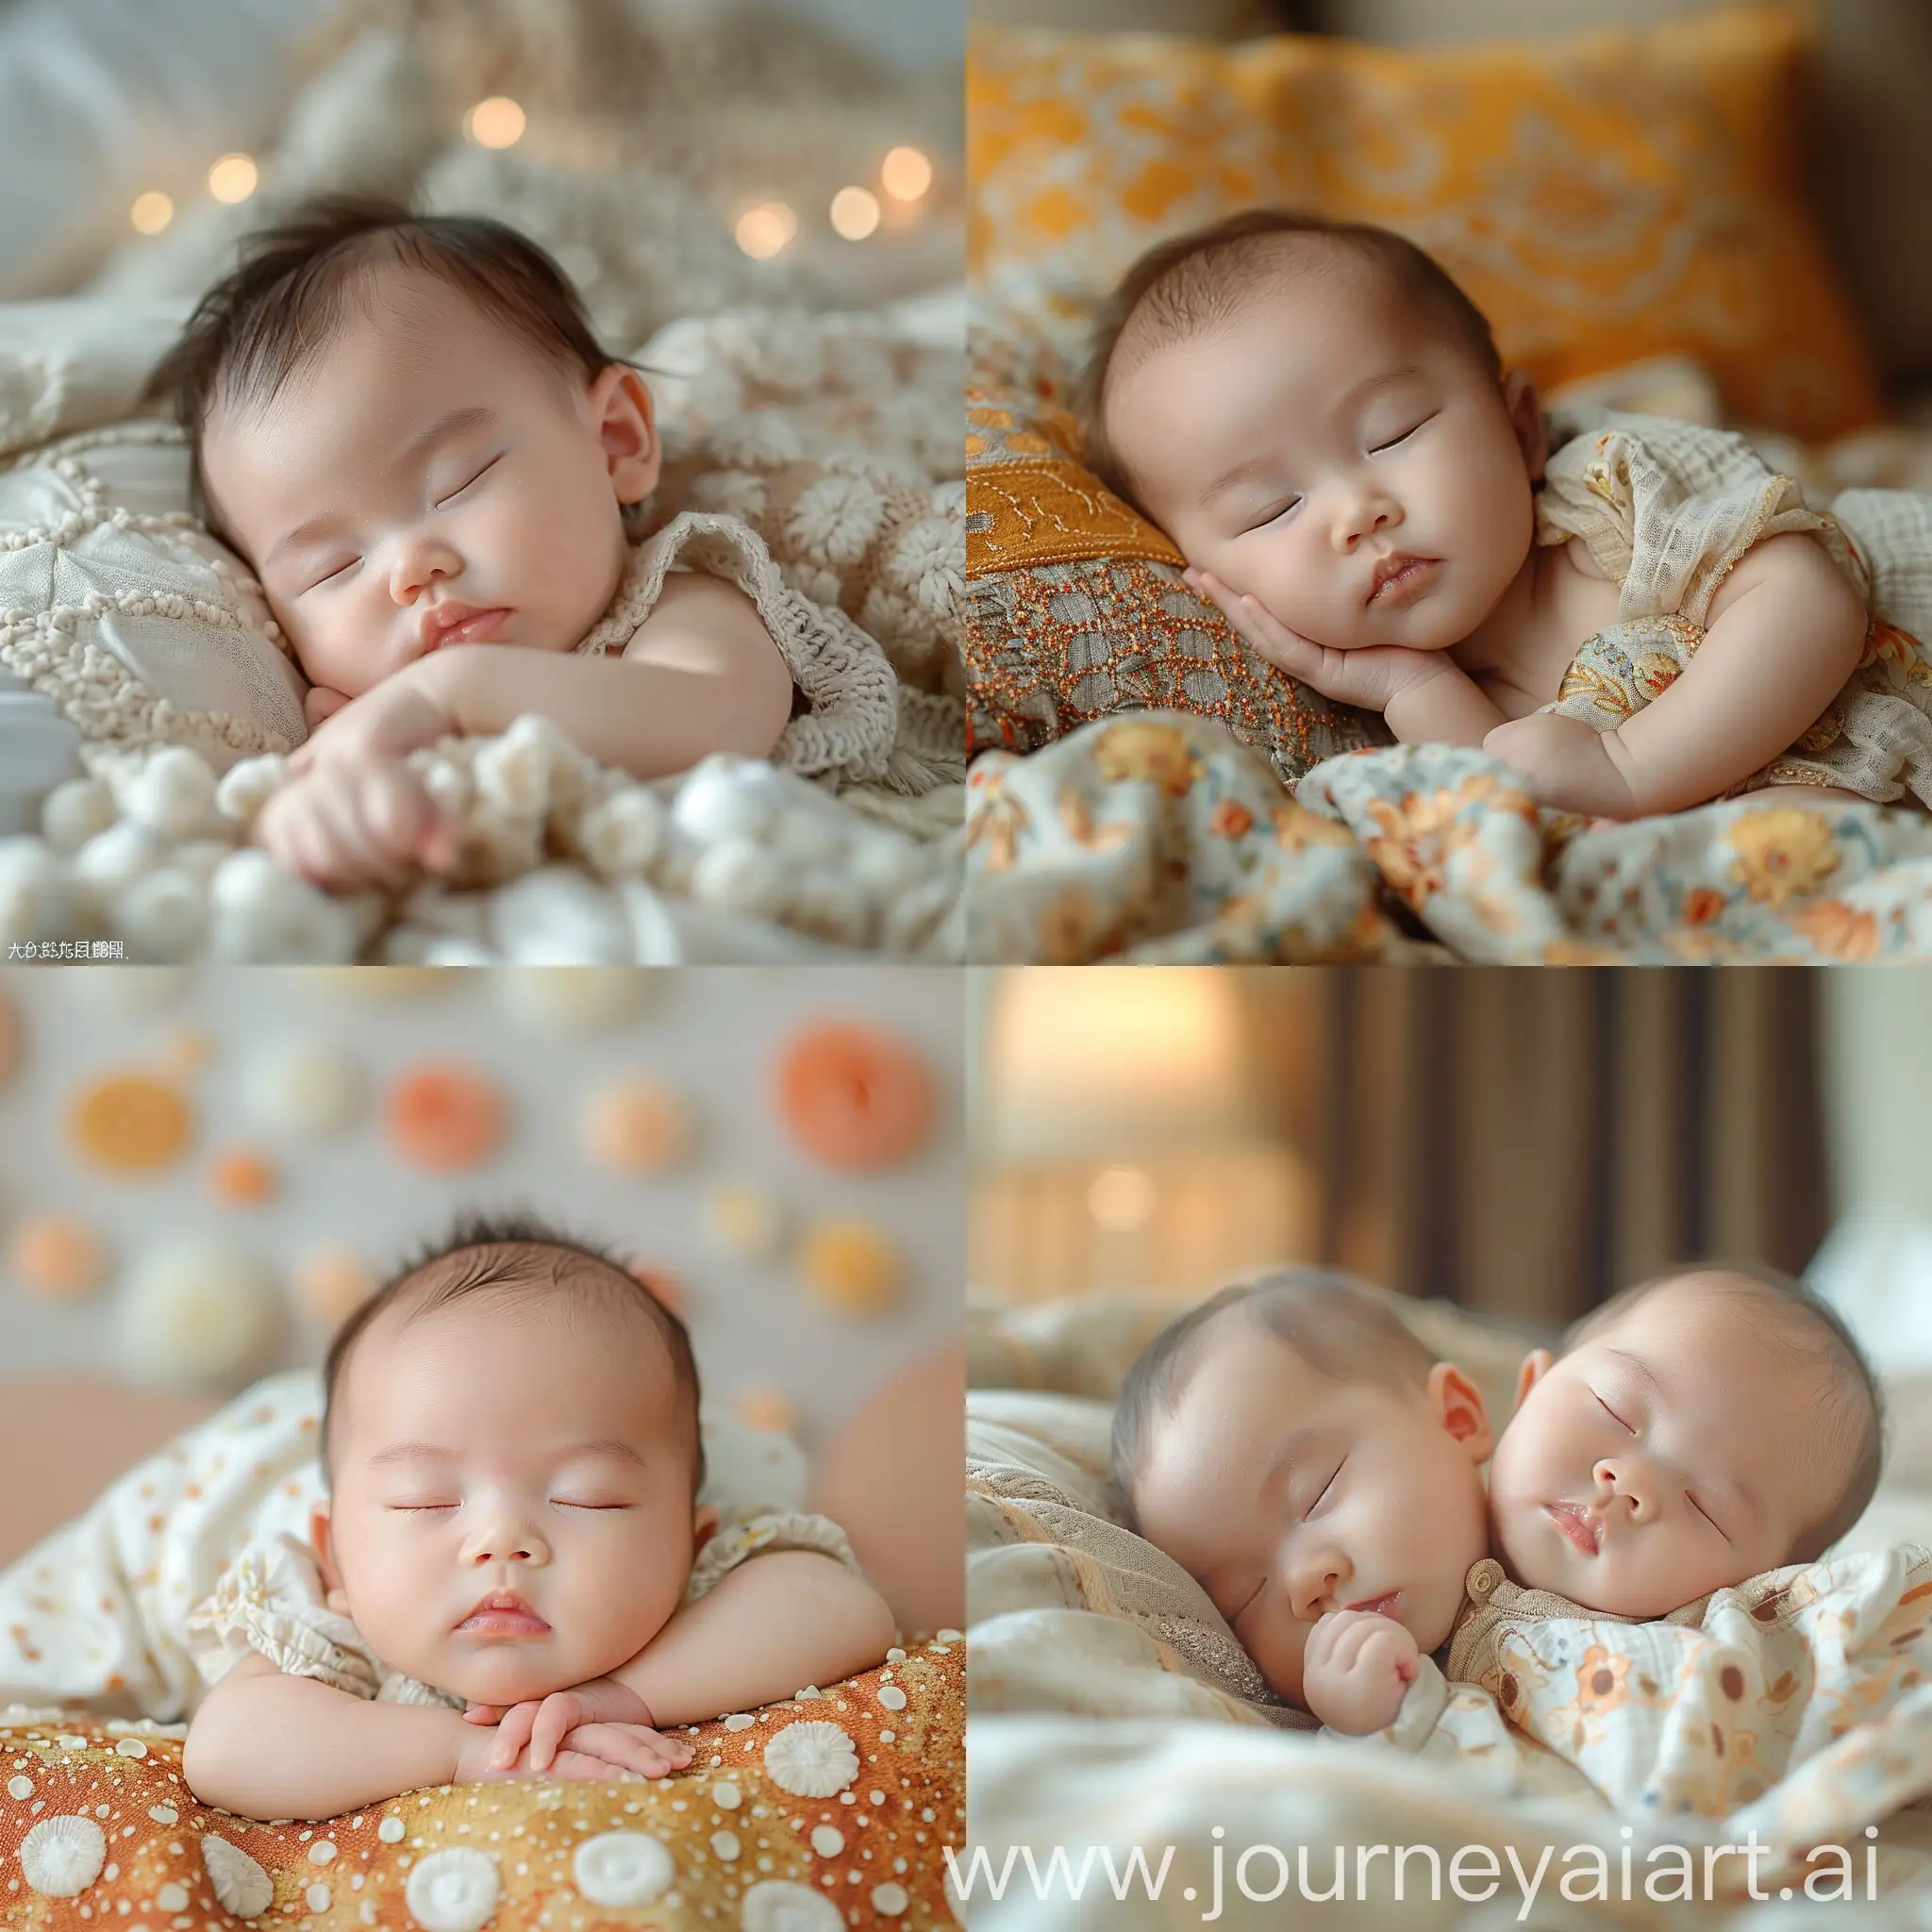 https://i.hd-r.cn/1145e60651148c43c7c4cae82ab6e7e1.jpg a chinese newborn baby is peacefully asleep. The photograph is realistic, with a simple background. The baby's skin is fair and has numerous authentic pores.  He had a smooth-skinned face and a little of soft infant hair. The male infant appears natural, and the lighting, either natural or artificial, imitates daylight, giving a soft and soothing ambiance. The baby is dressed in gentle and stylish clothing, adding to the overall portrait style of the photograph. --s 750